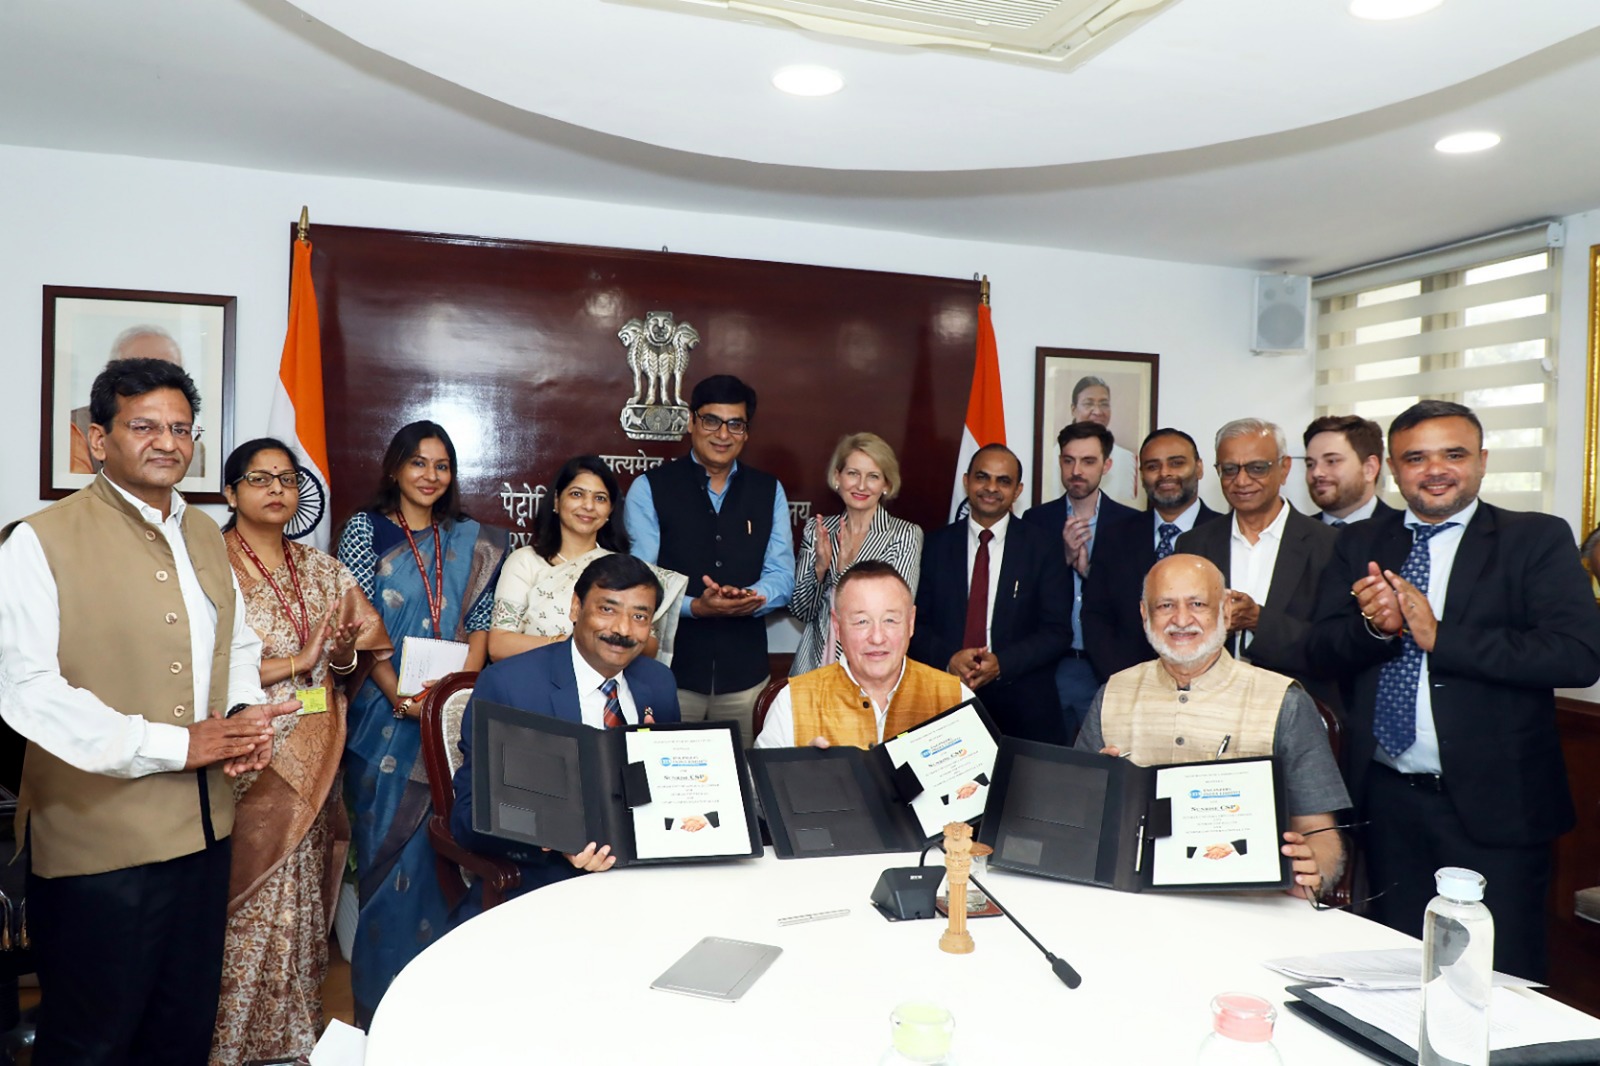 EIL joins hands with Sunrise CSP Group to spearhead implementation of Concentrated Solar Power (CSP) Technology Solutions in India and Overseas